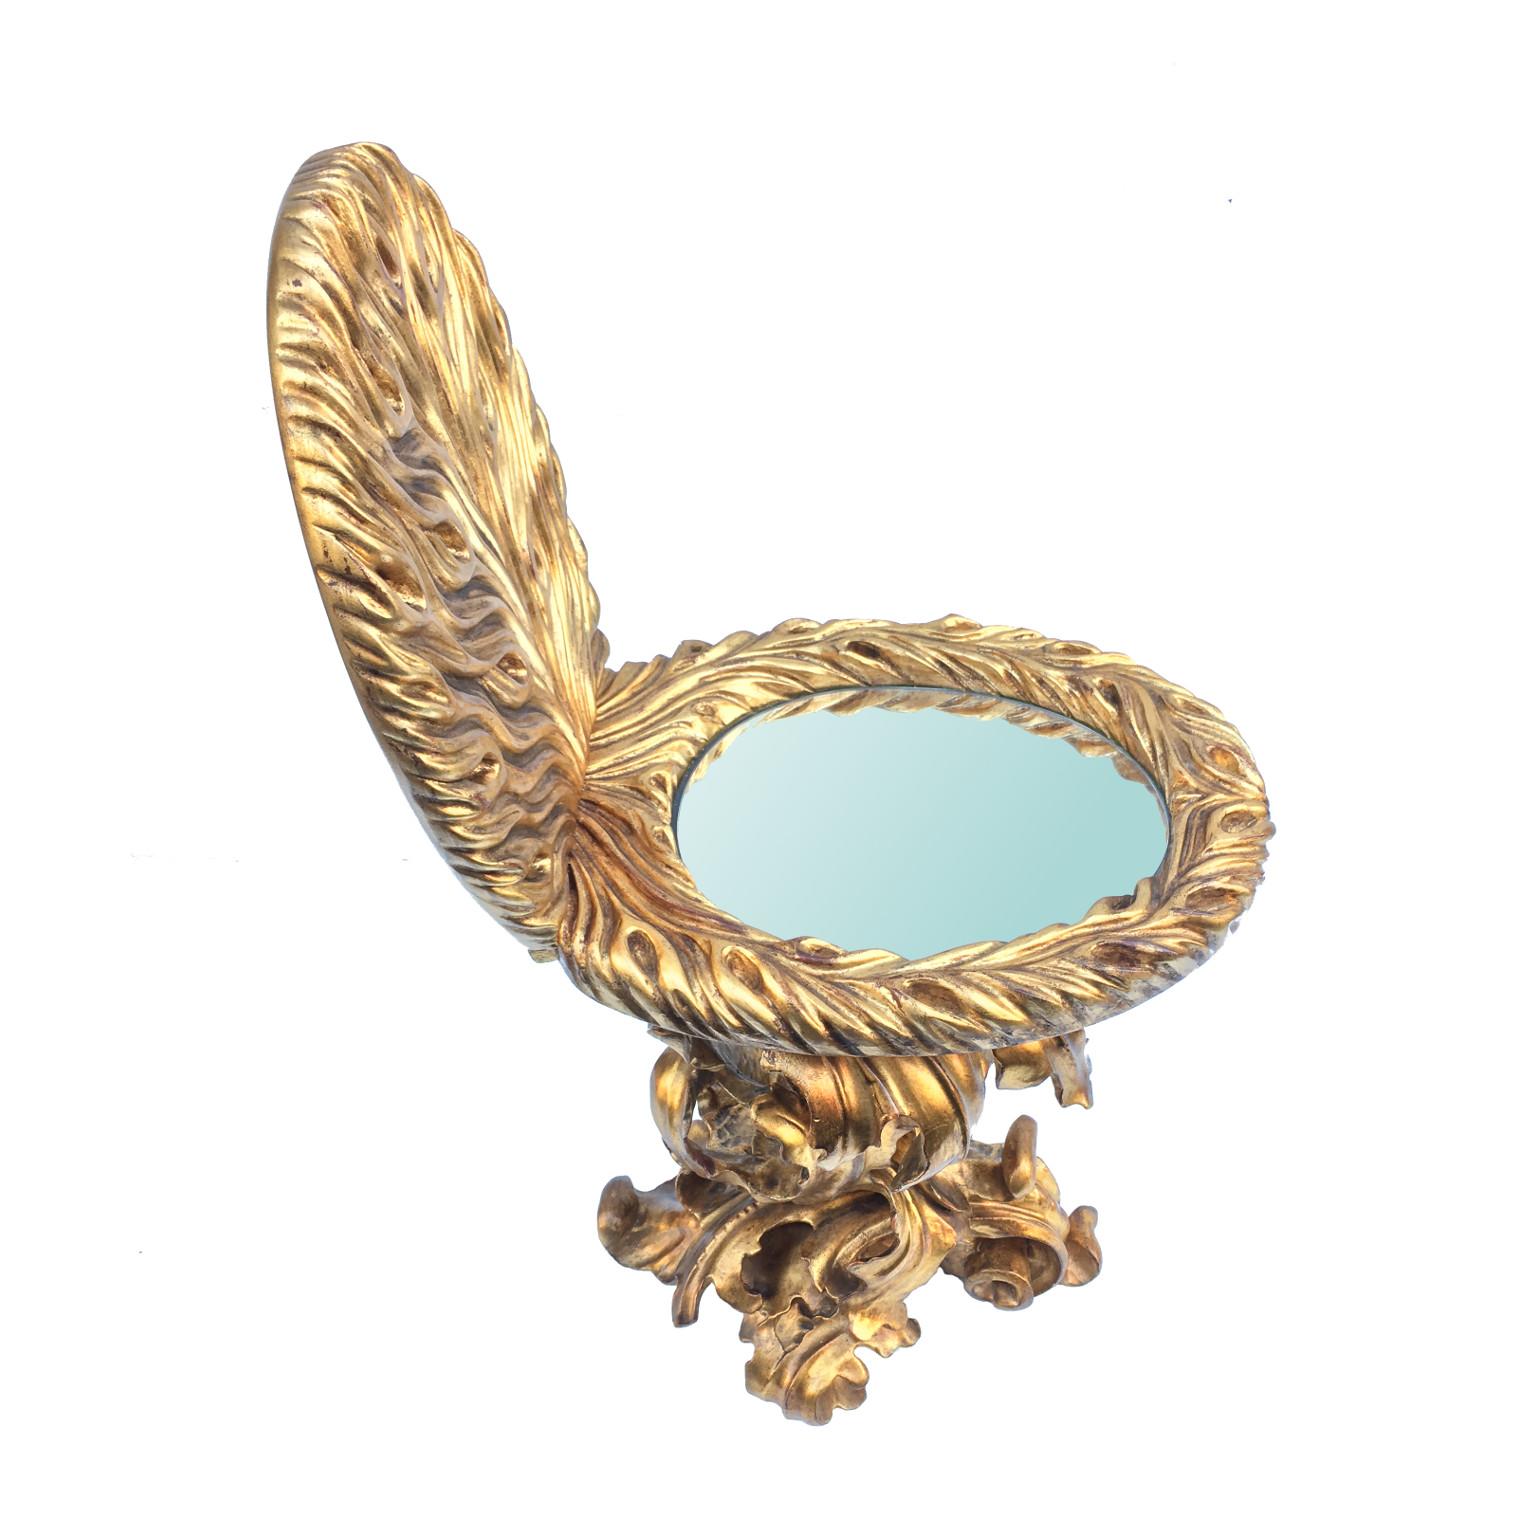 Contemporary Giltwood Toilet Shaped Sculptural Side Table With Mirror Top For Sale 1